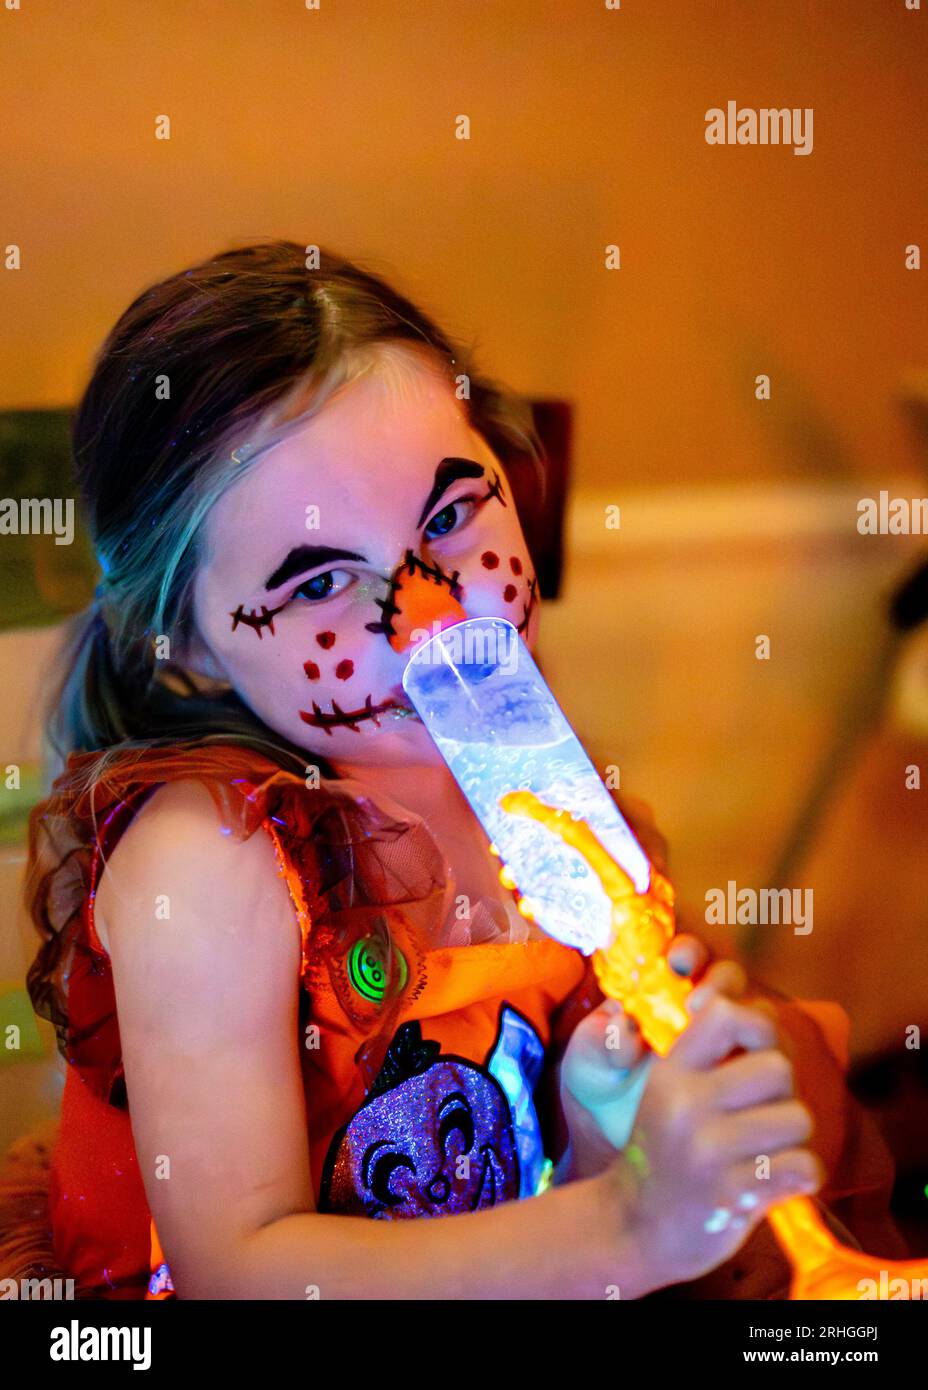 Kid drinking potion on Halloween scarecrow makeup face paint glowing in black light Stock Photo